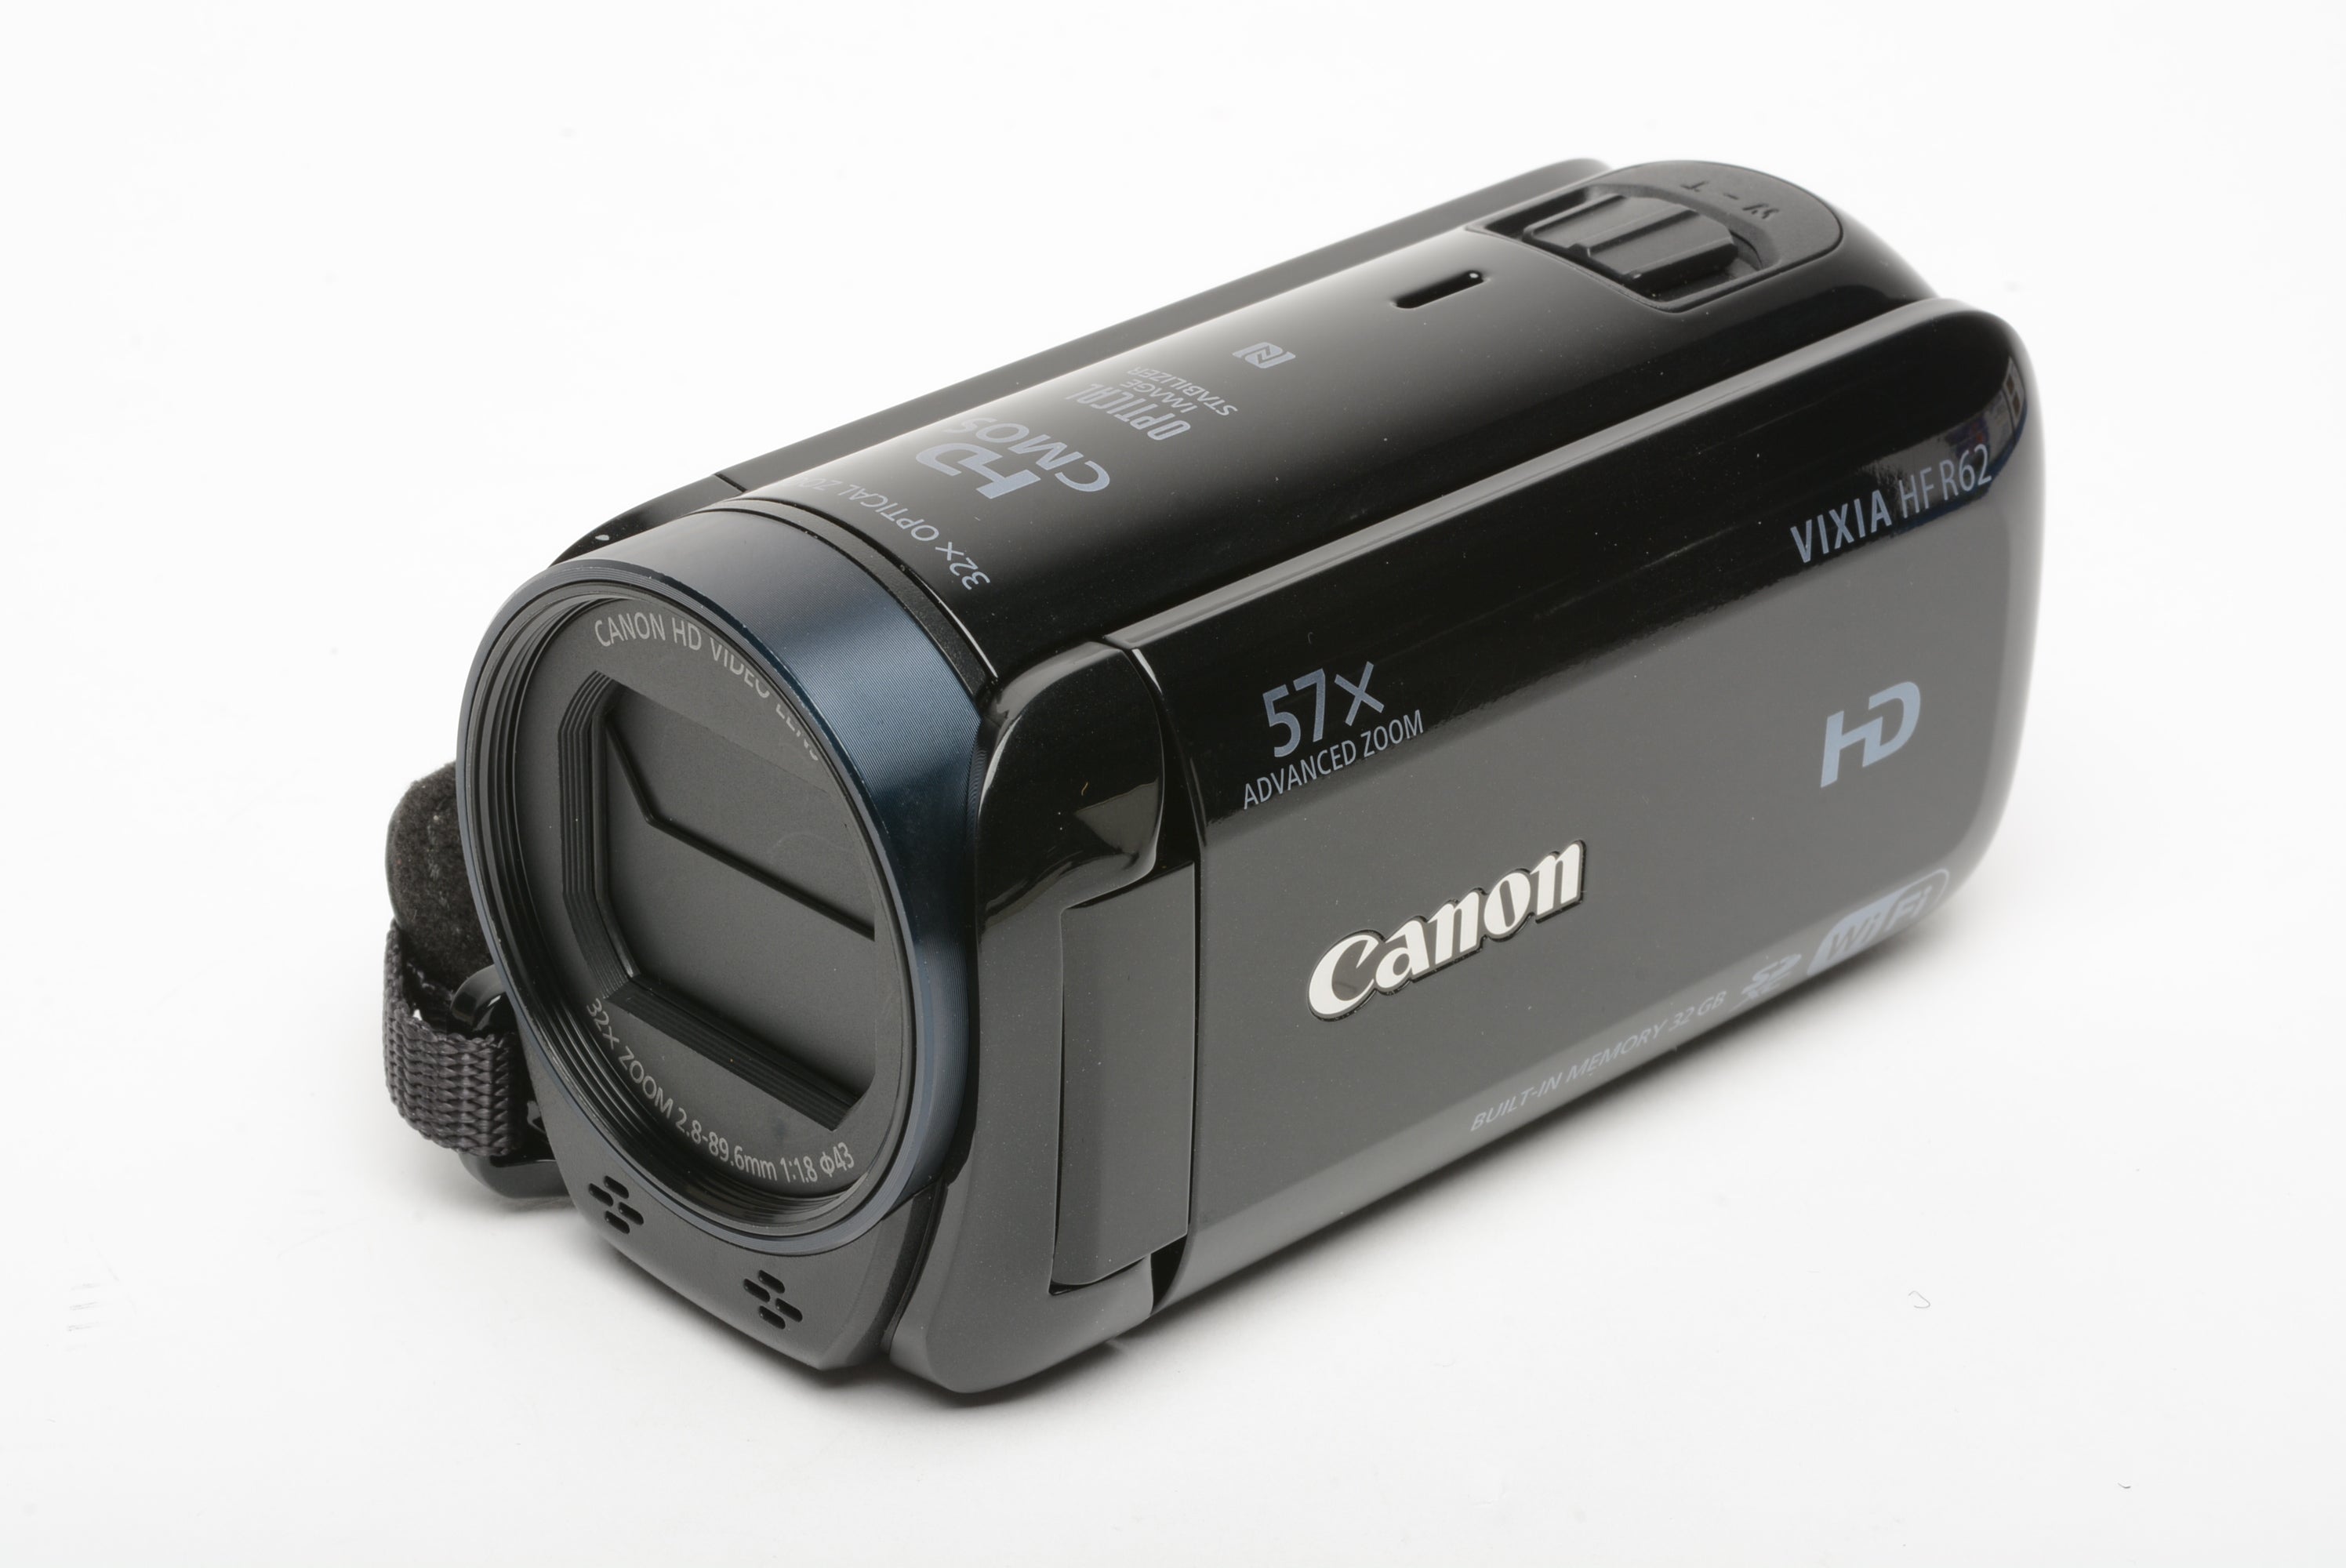 Canon IVIS HF R62-